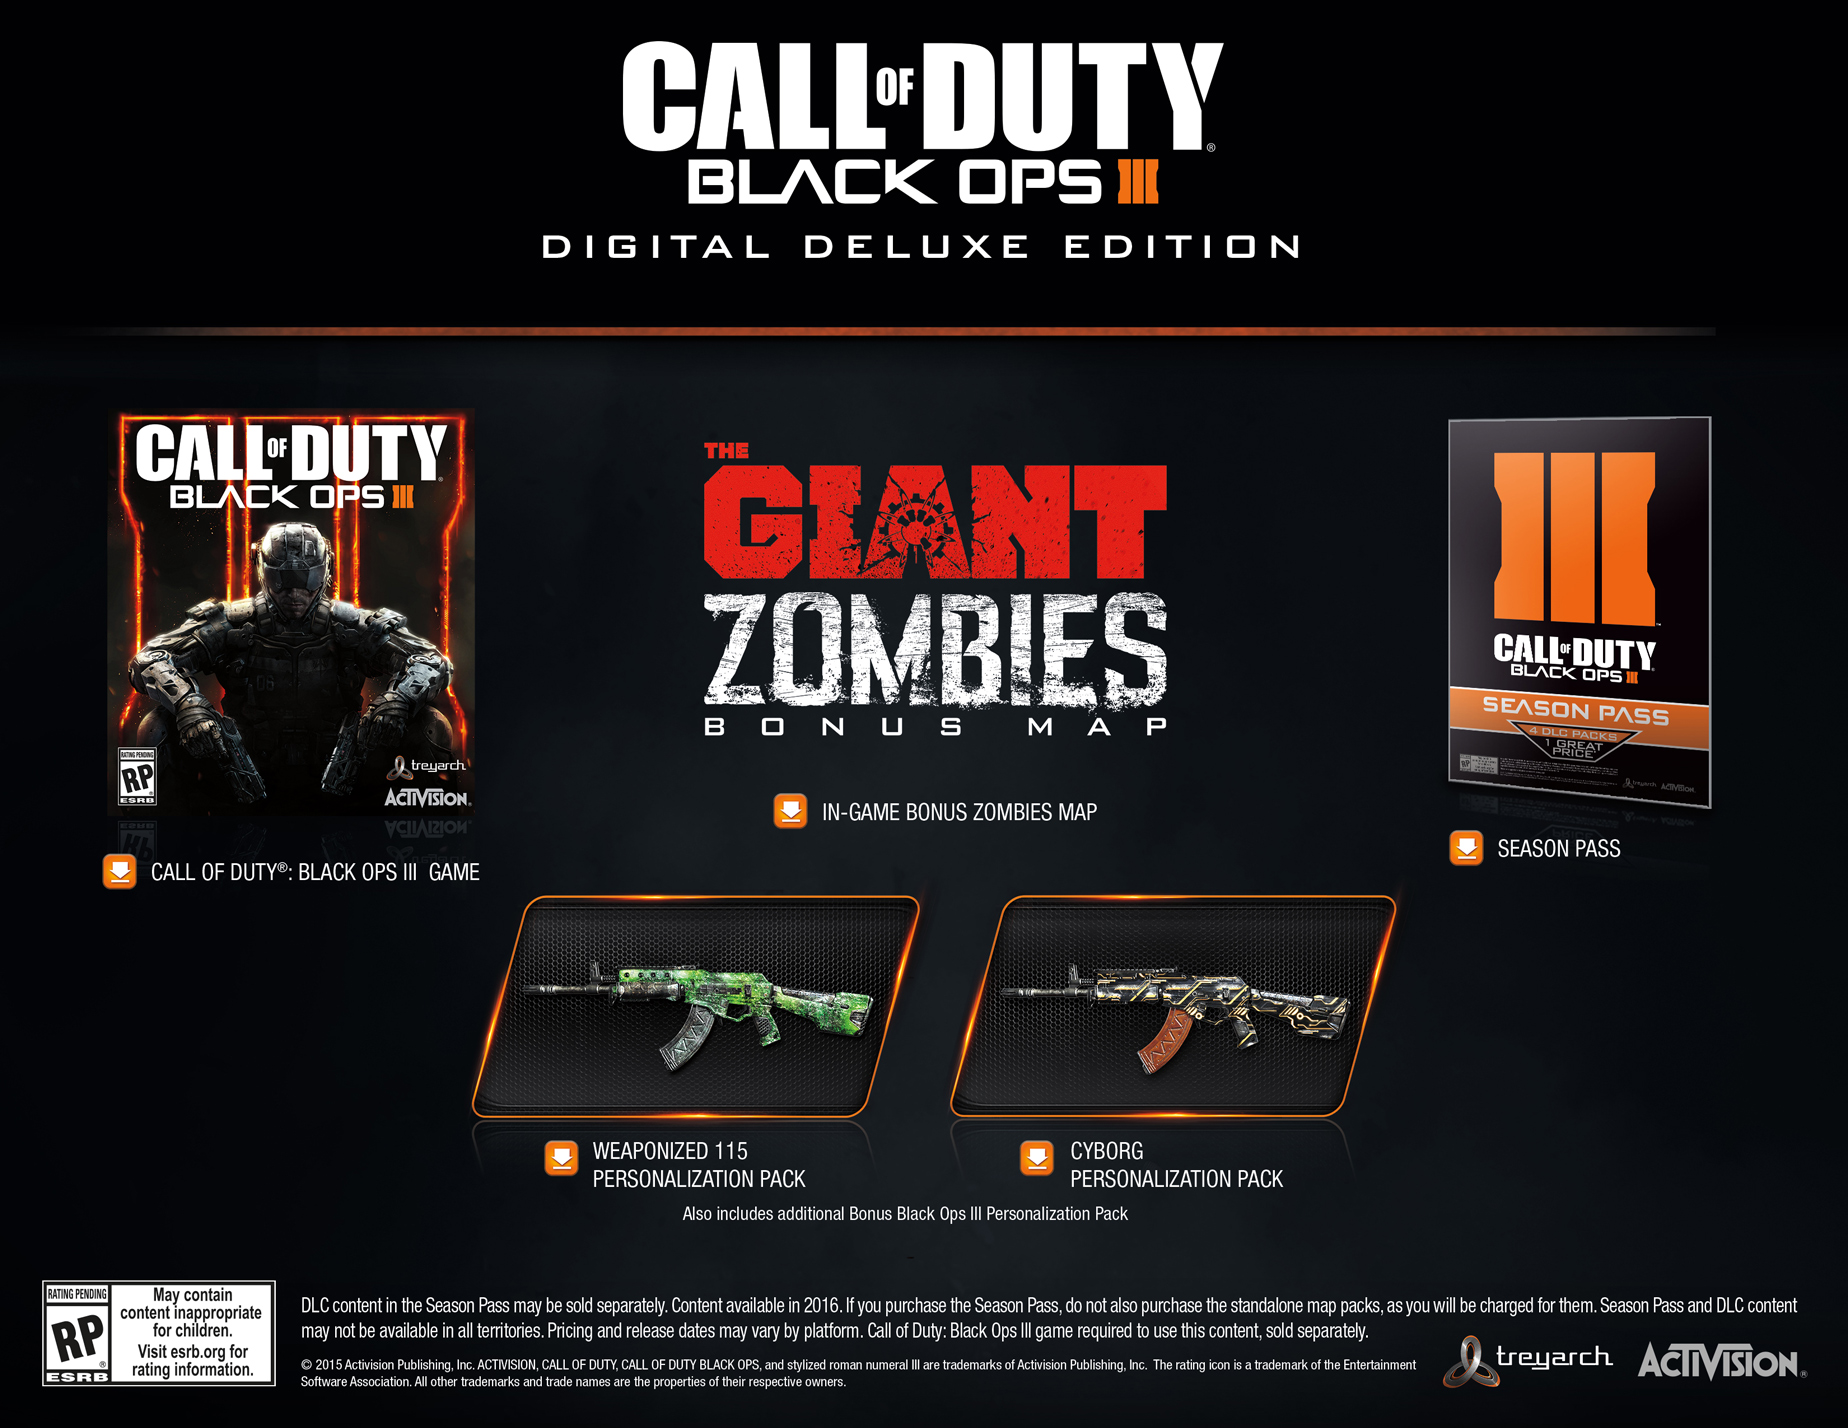 Call of Duty: Black Ops III - Digital Deluxe Edition contents